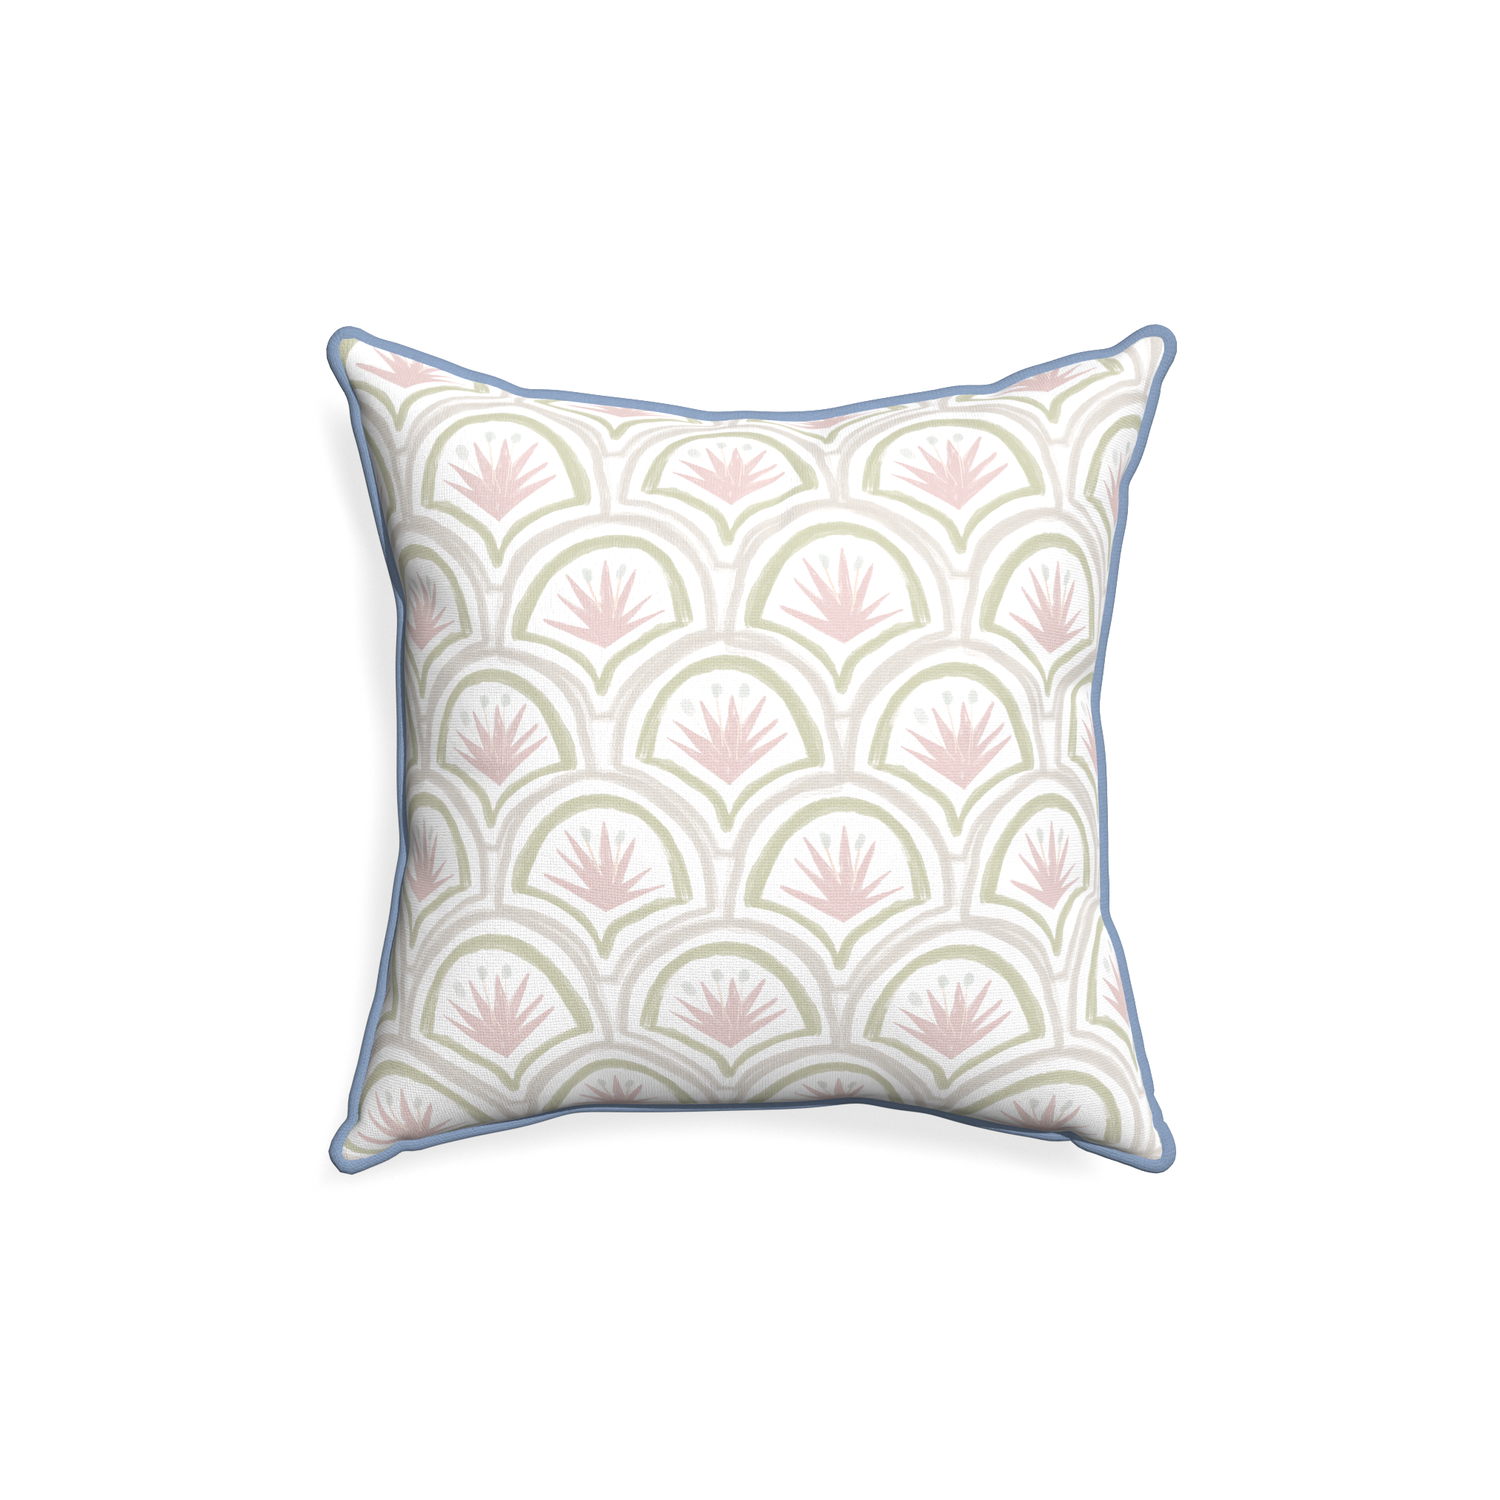 18-square thatcher rose custom pillow with sky piping on white background